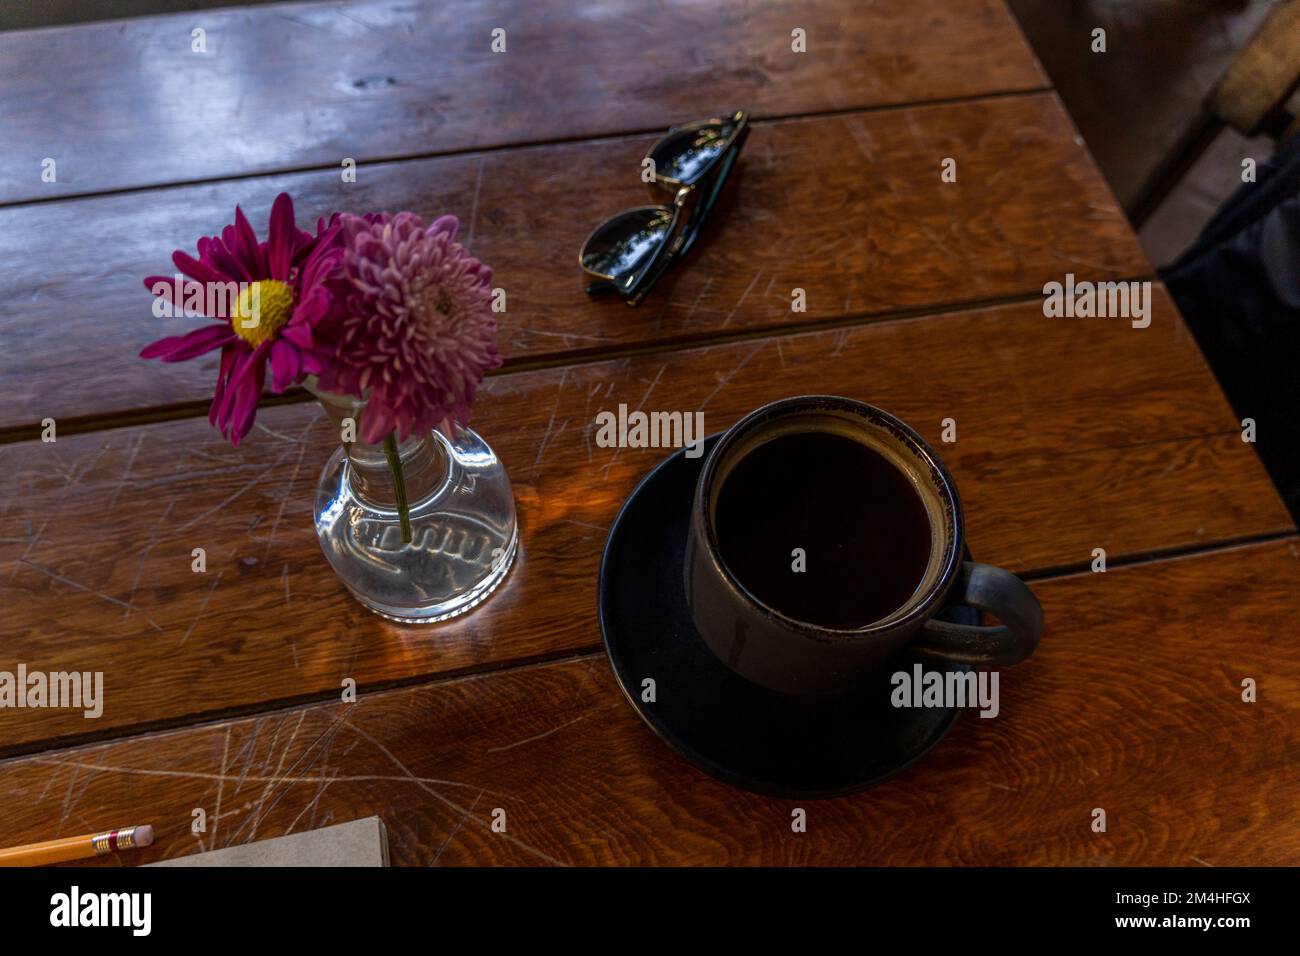 cup of coffee wooden table in the background vase with purple flowers in the background vegetation Stock Photo